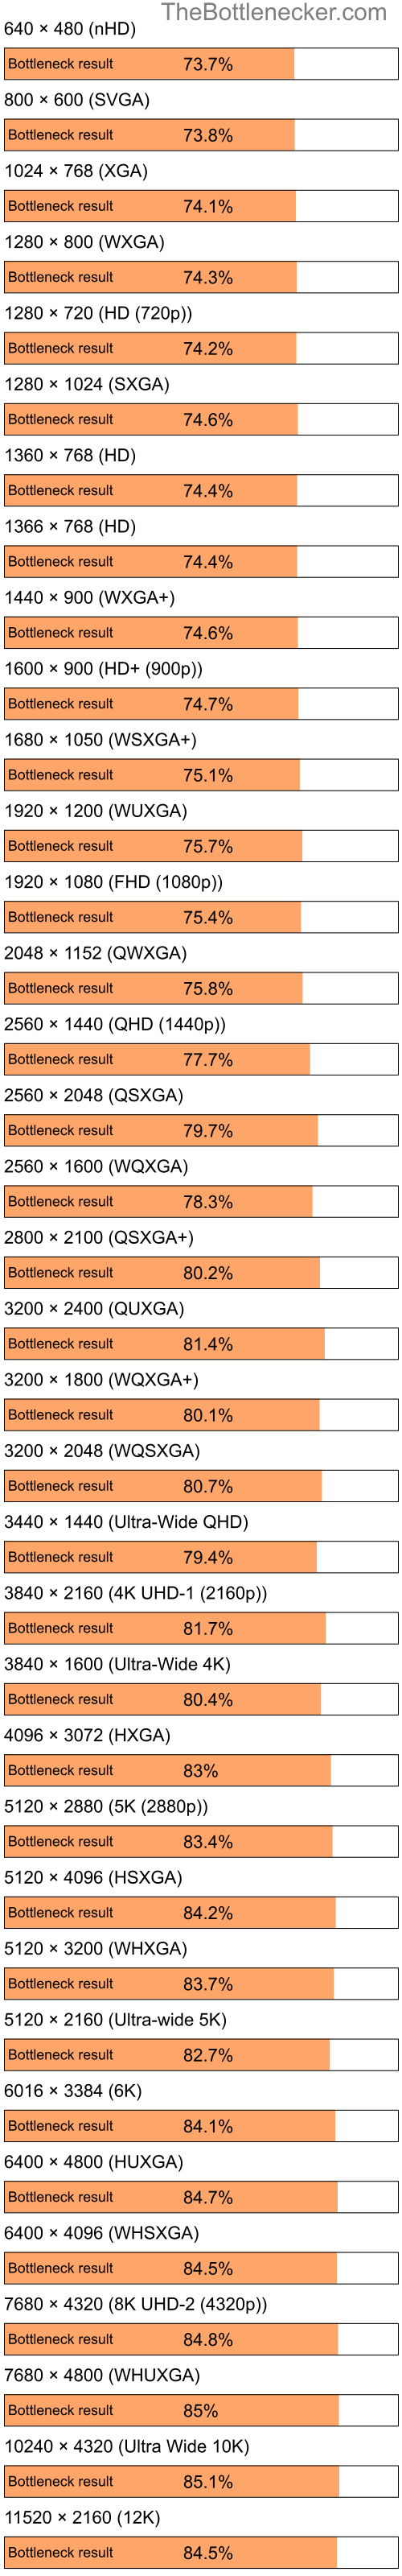 Bottleneck results by resolution for Intel Pentium 4 and NVIDIA Quadro NVS 120M in General Tasks